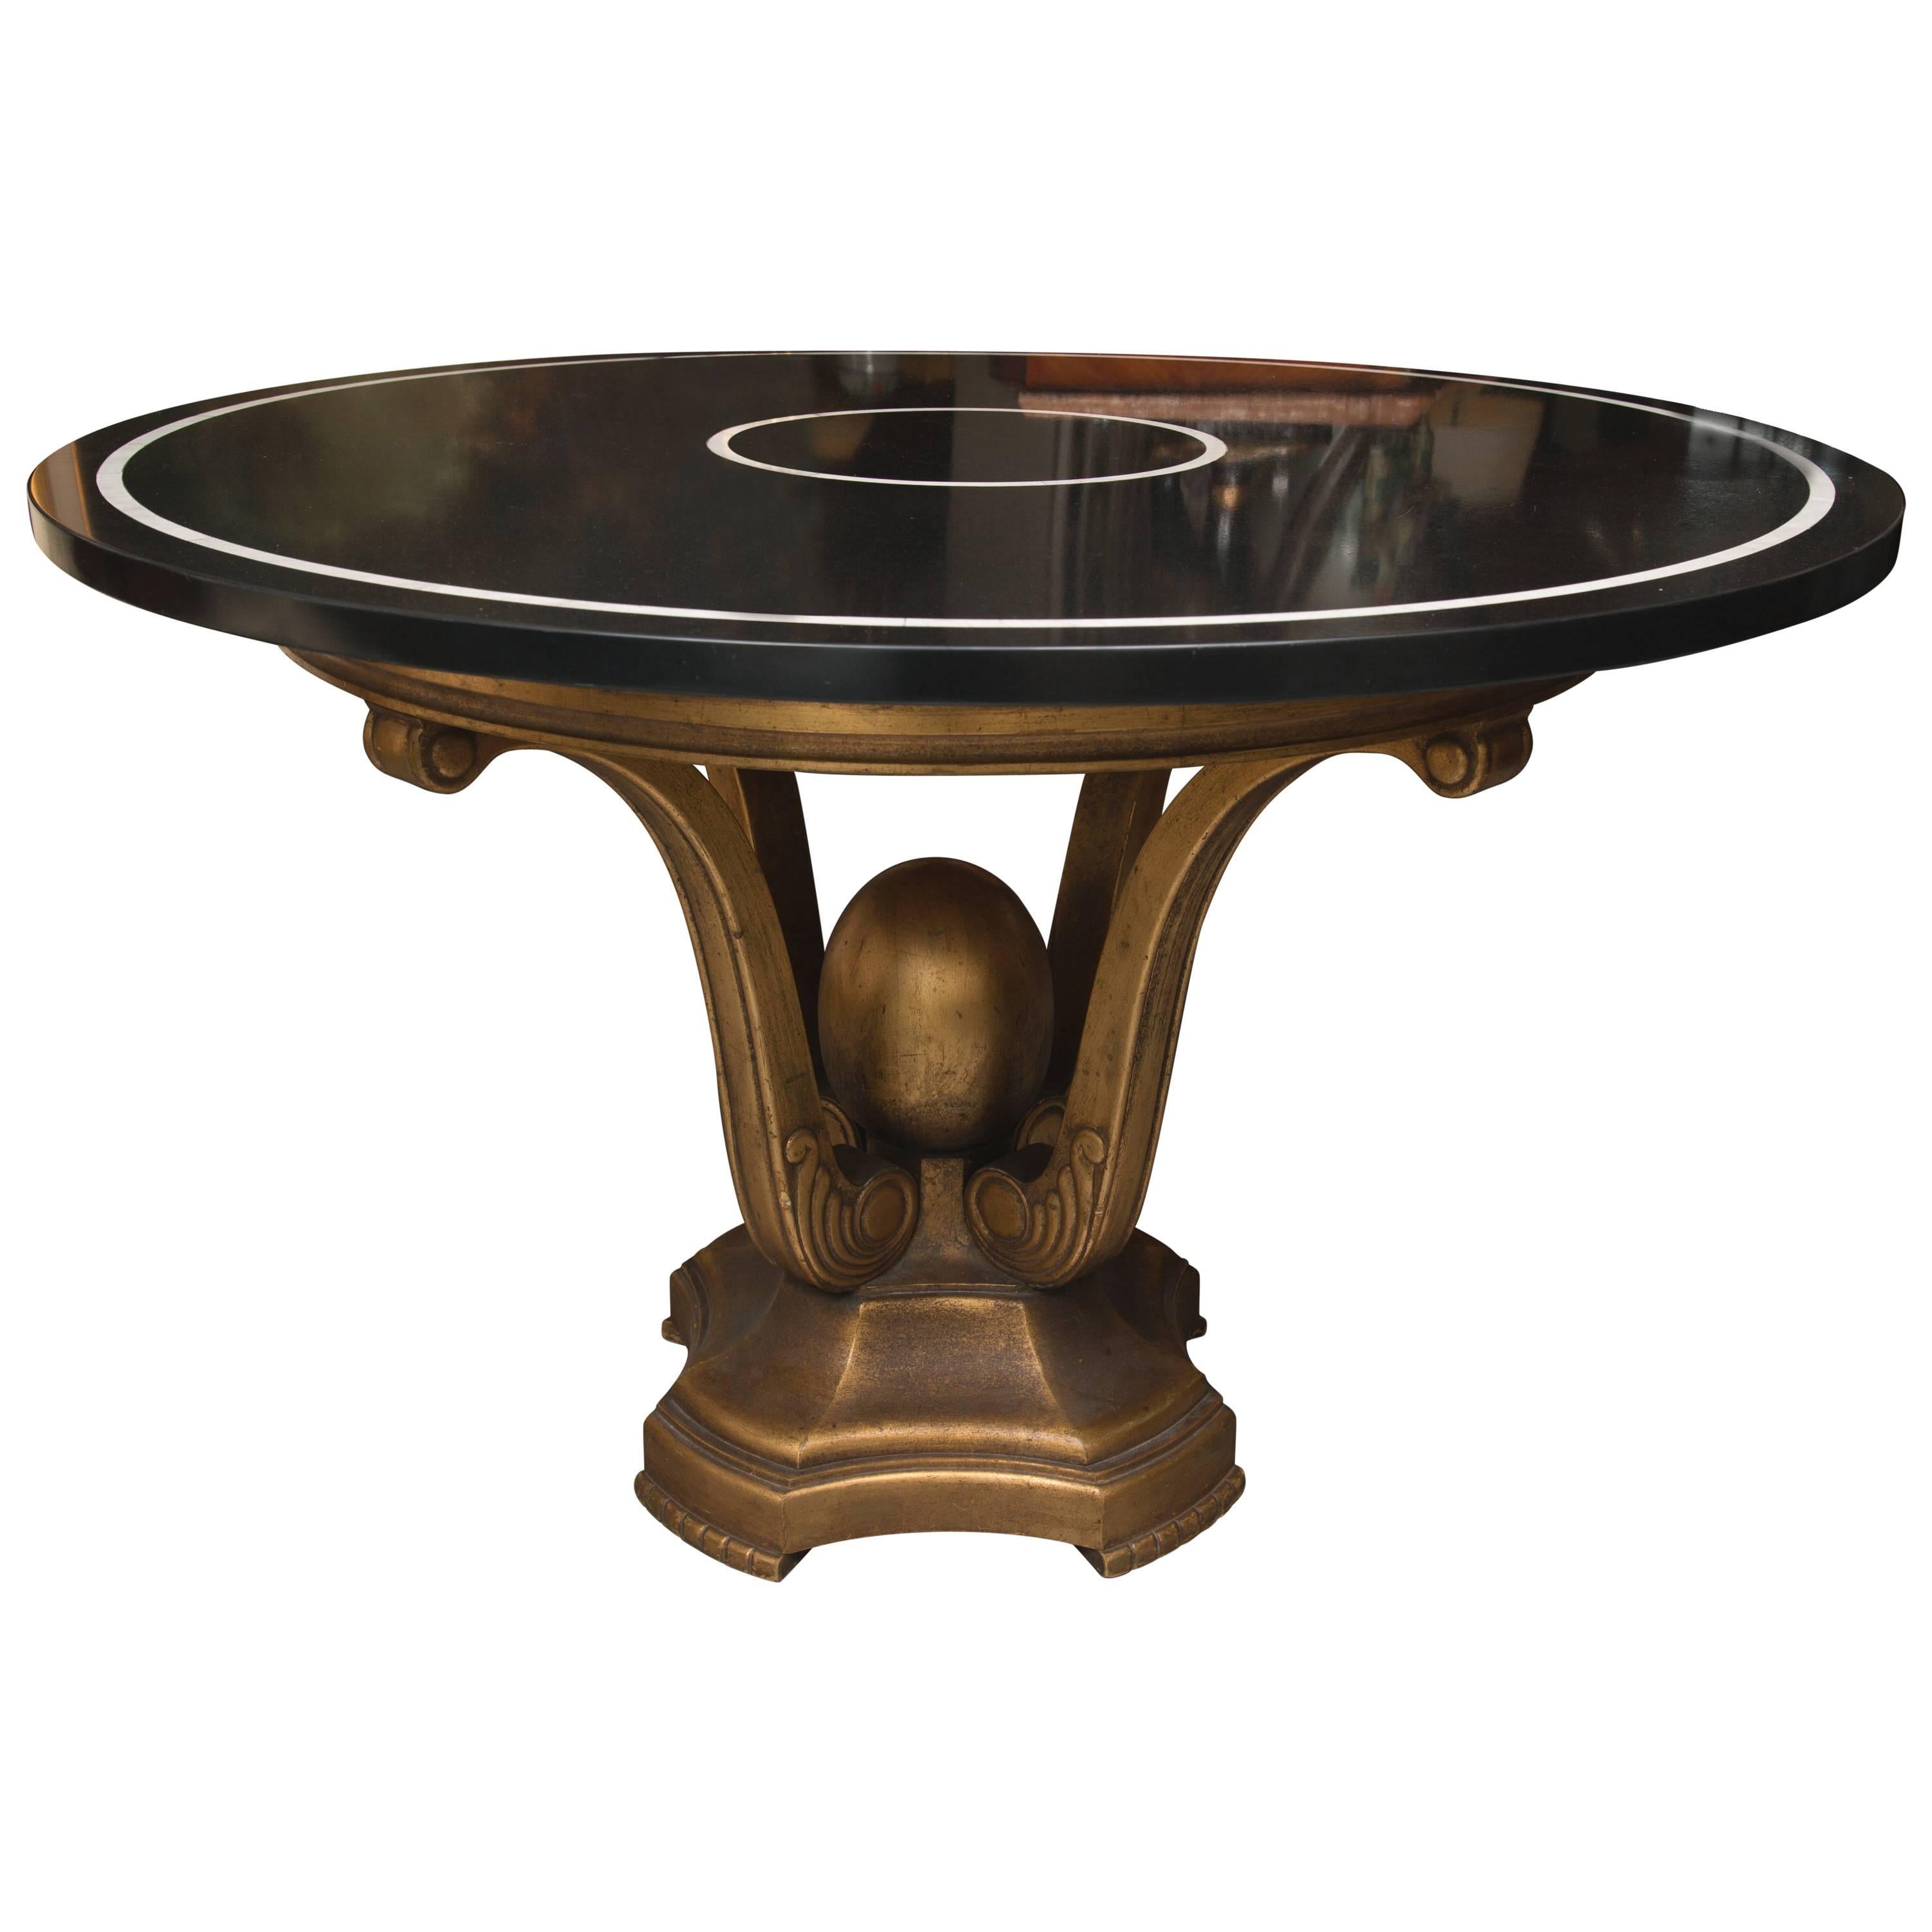 Giltwood Center Table with Inlaid Black Granite Top